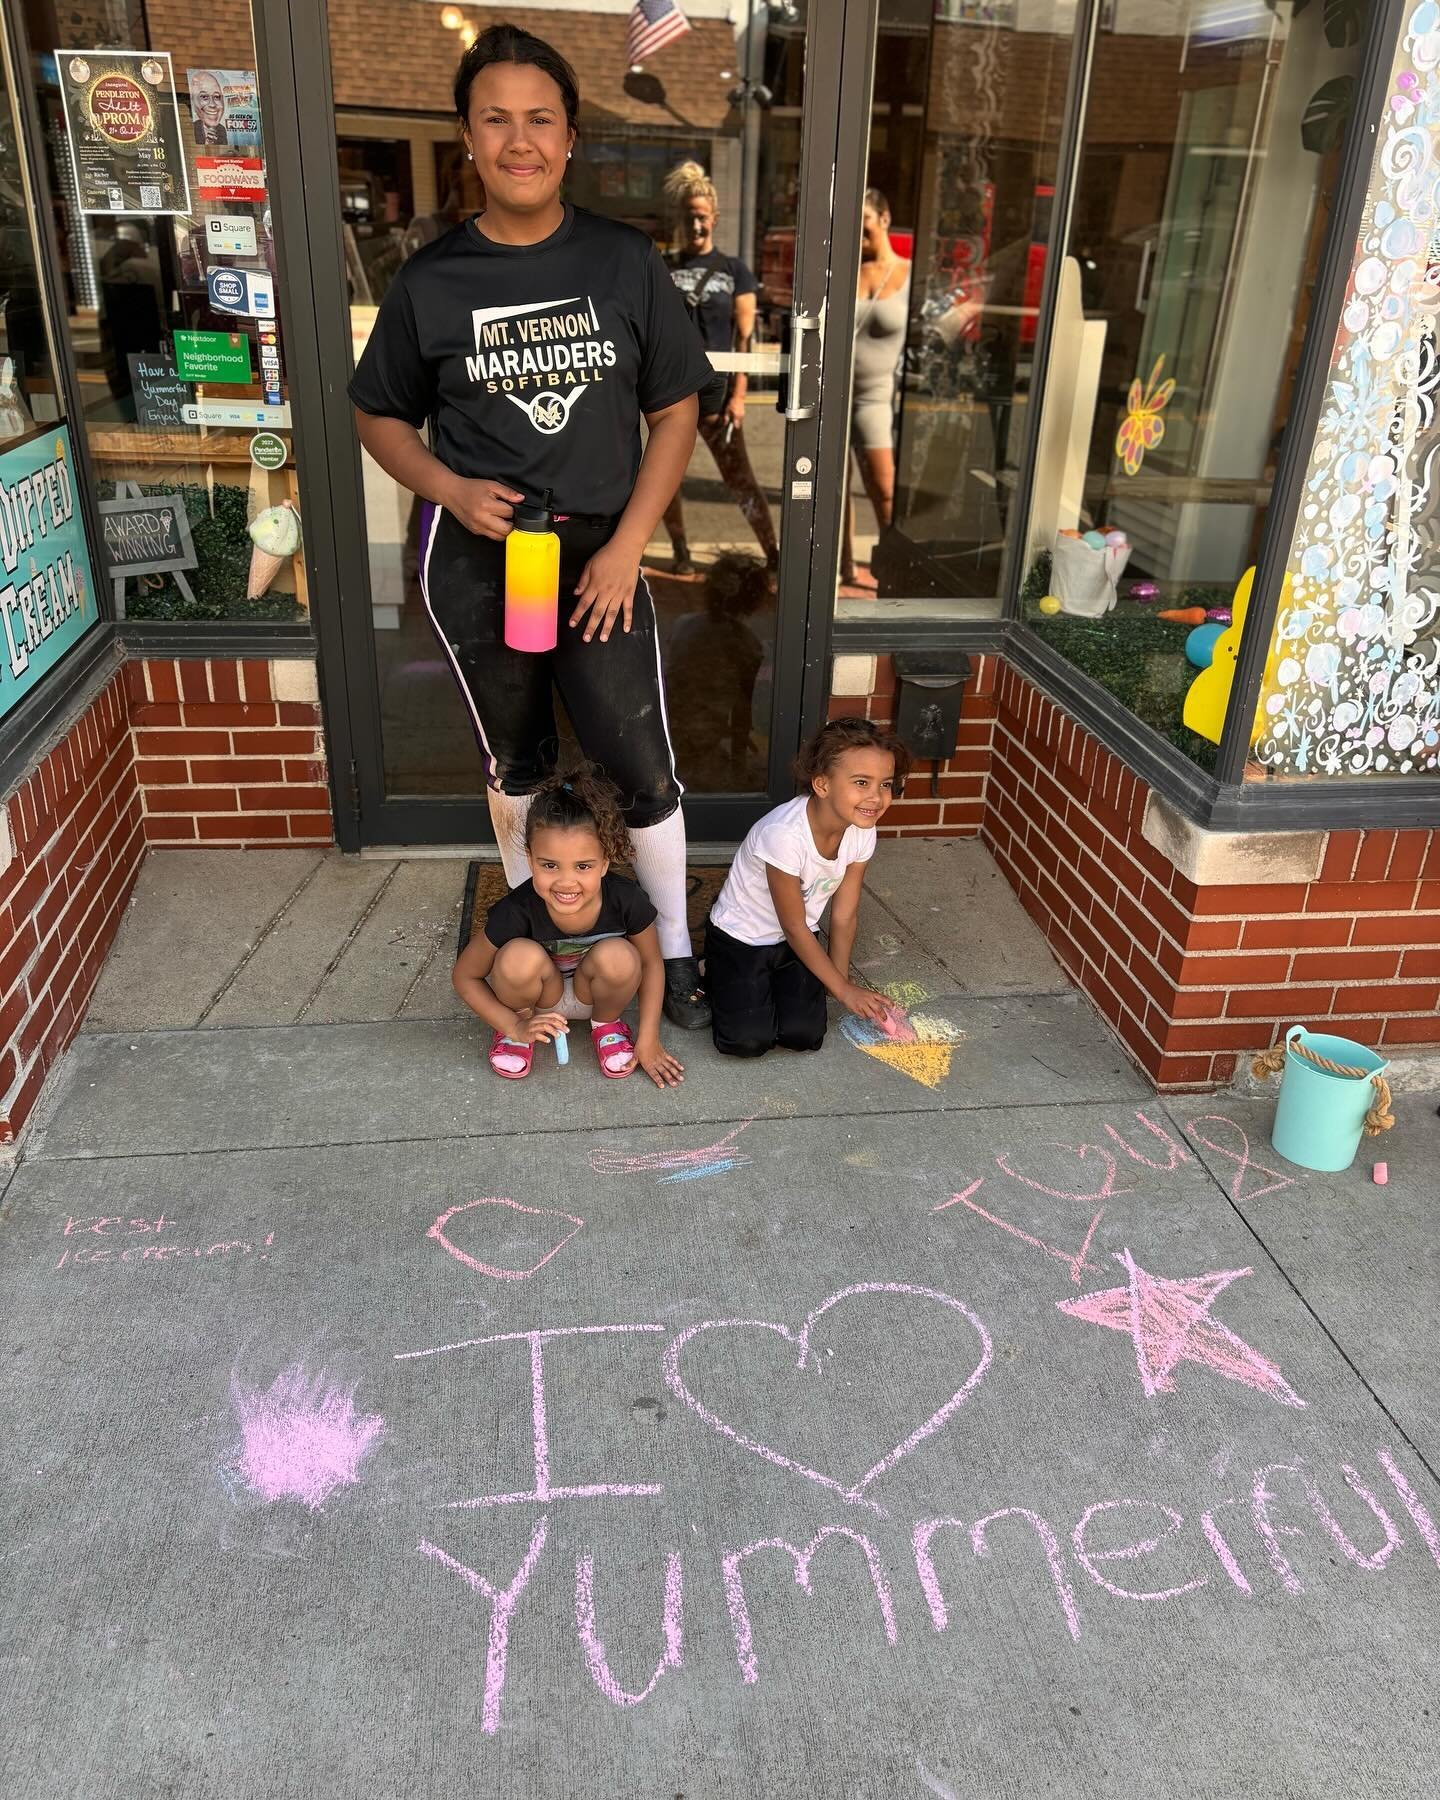 Today&rsquo;s sidewalk art is brought to you by some of Yummerful&rsquo;s cutest customers🍦 Open til 7 today, see you soon!